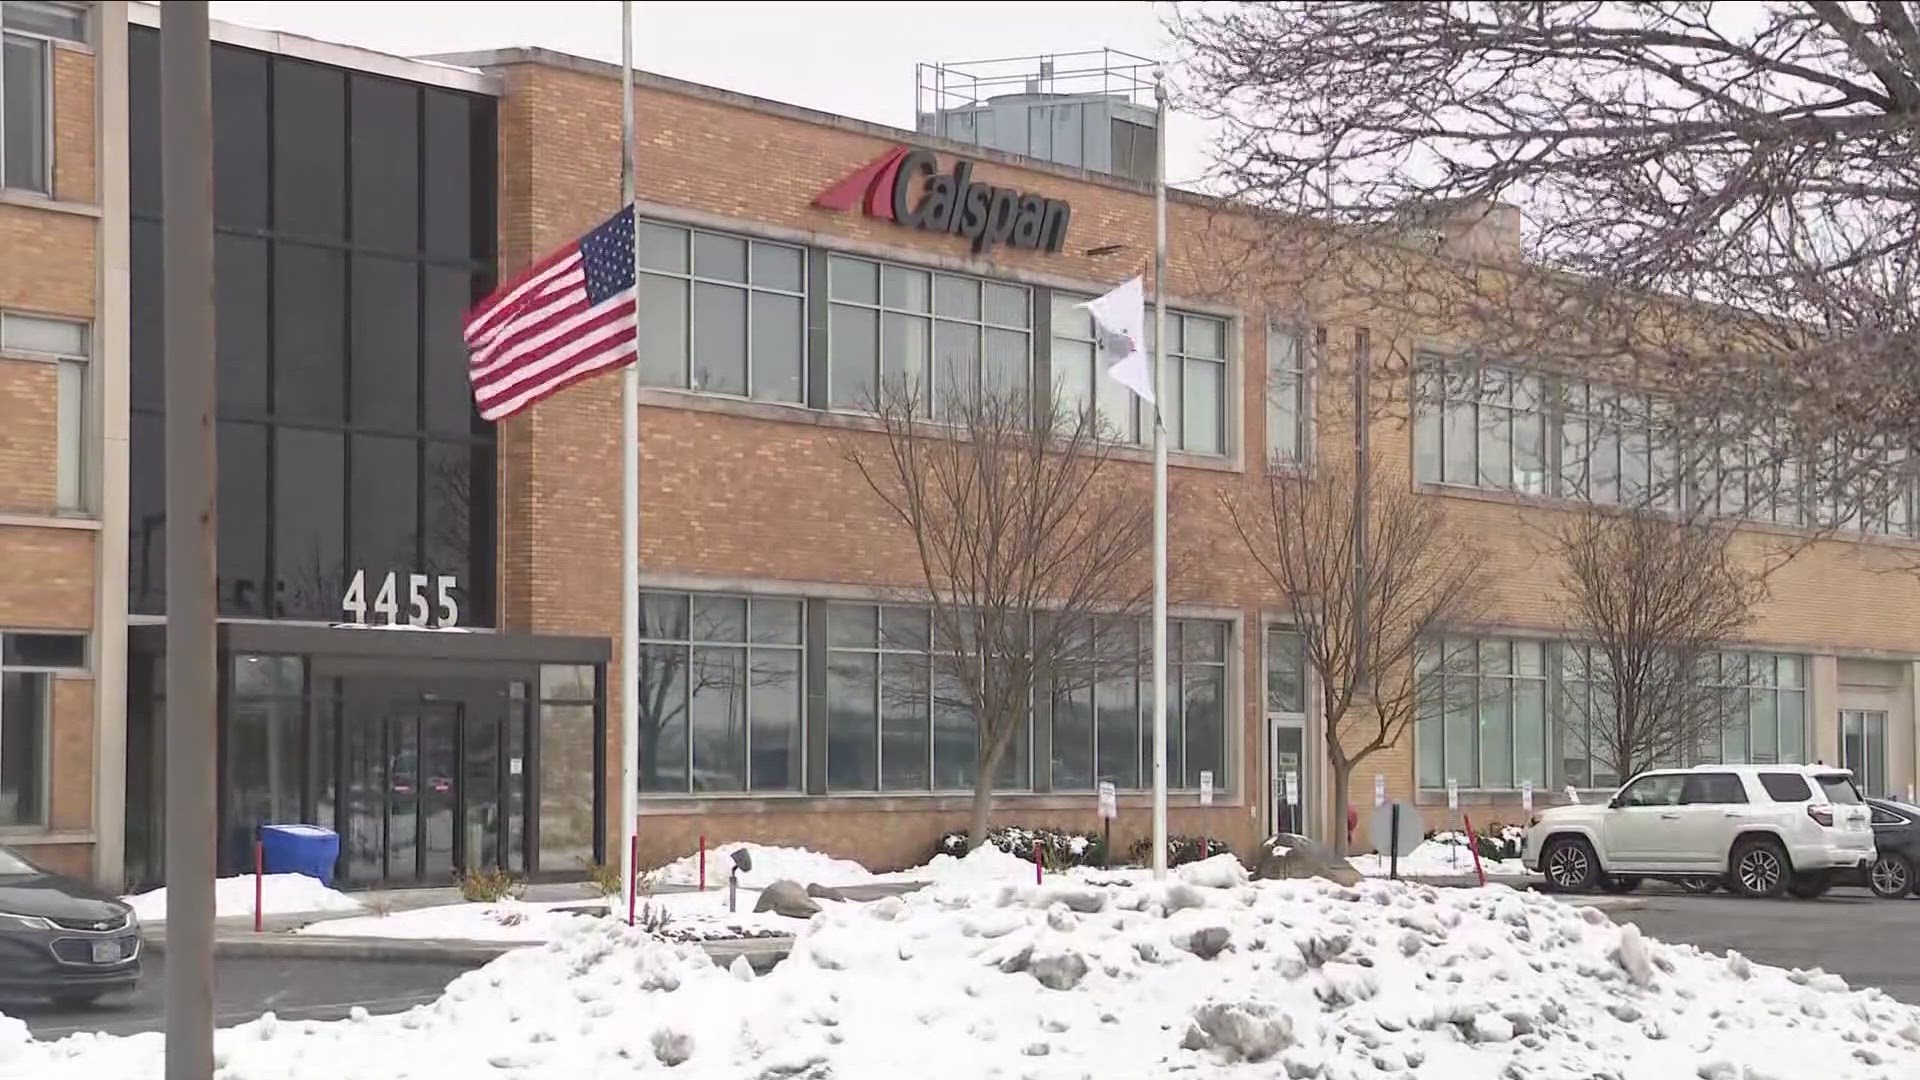 Calspan is headquarter on Genesee Street across from the airport... and employs about 260 people in our area.